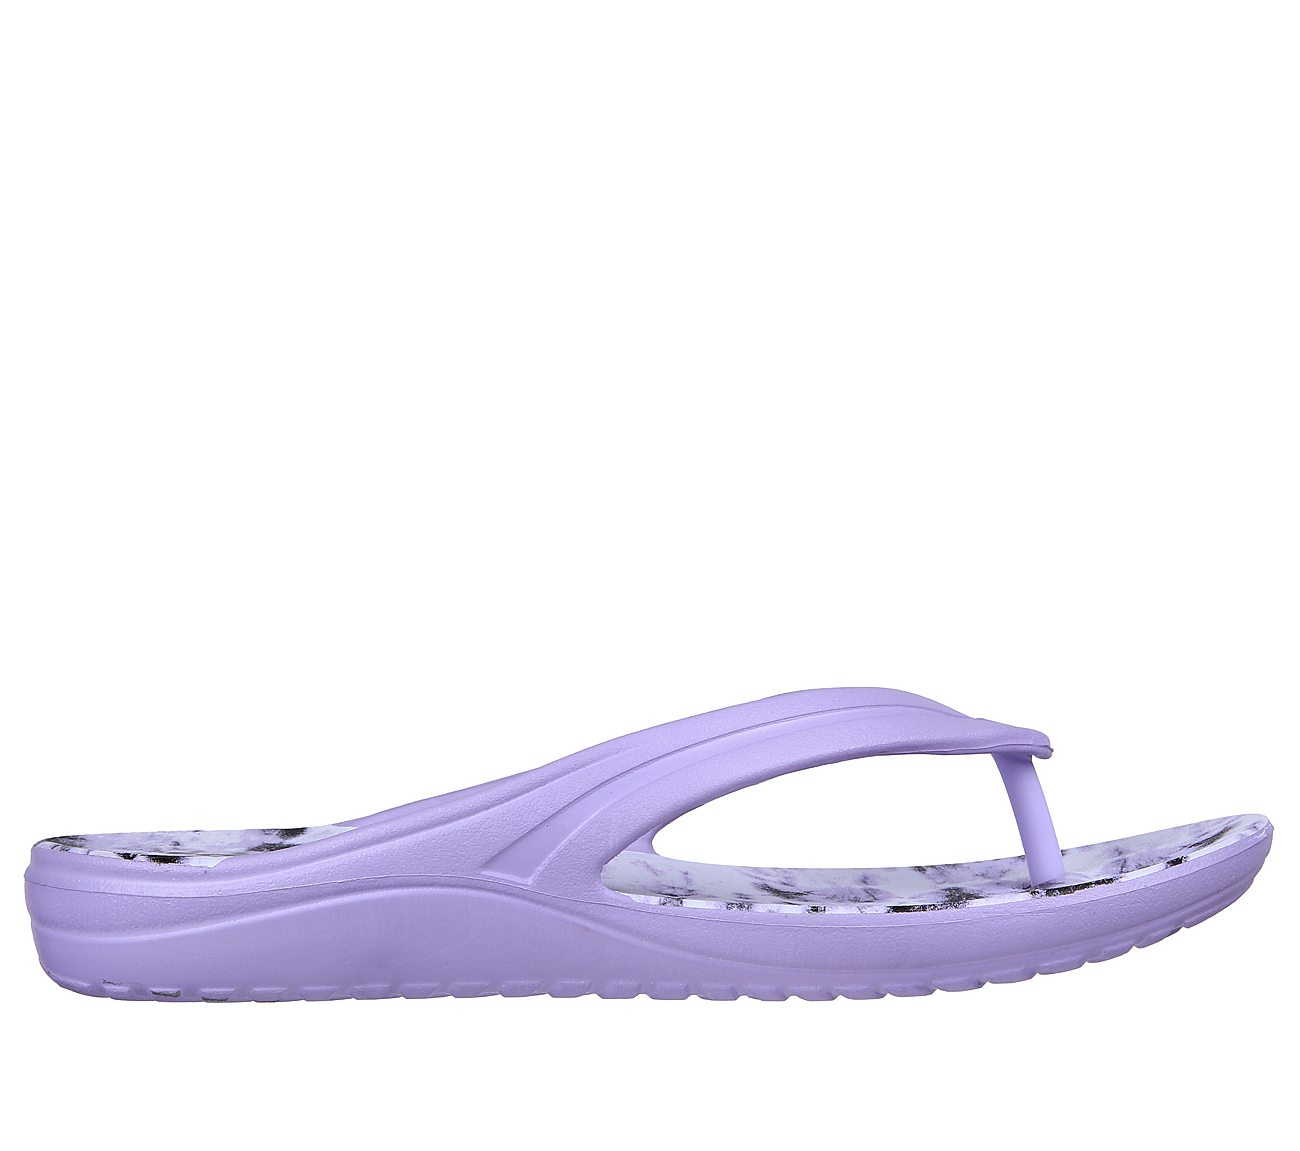 BAY BREEZE - SUNSET DREAMS, LAVENDER Footwear Lateral View